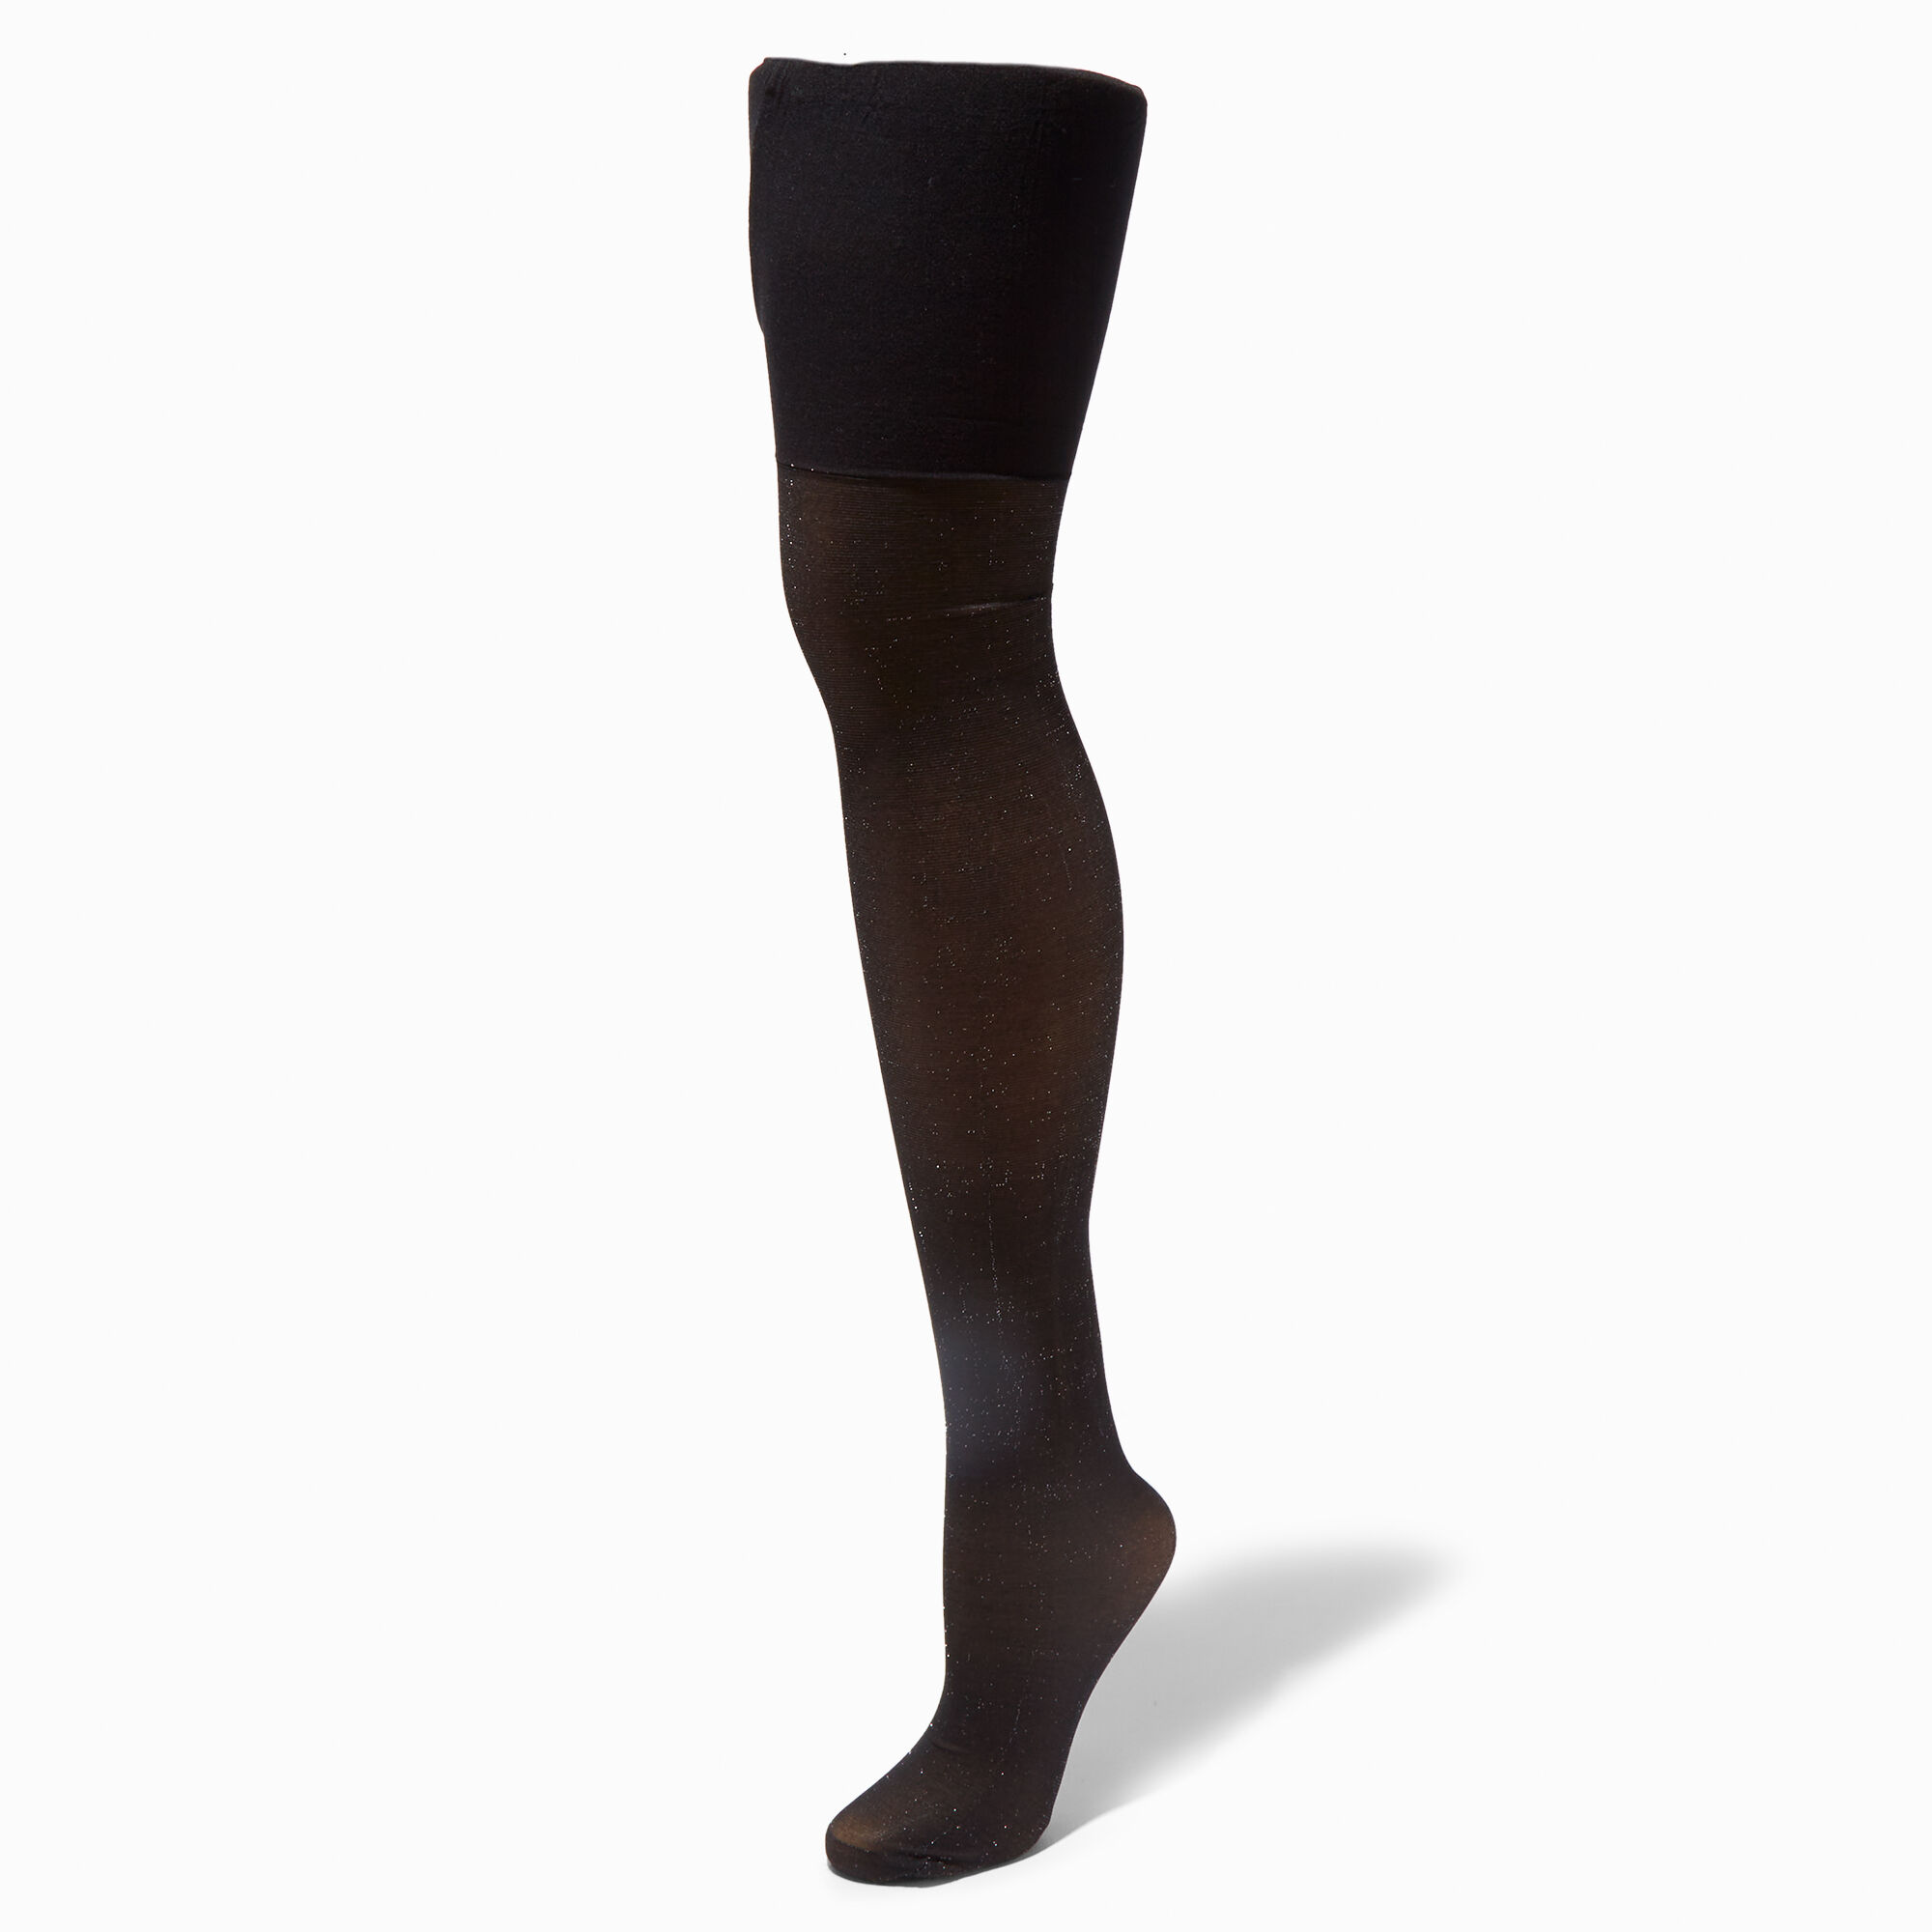 View Claires Shimmer Tights Sm Black information